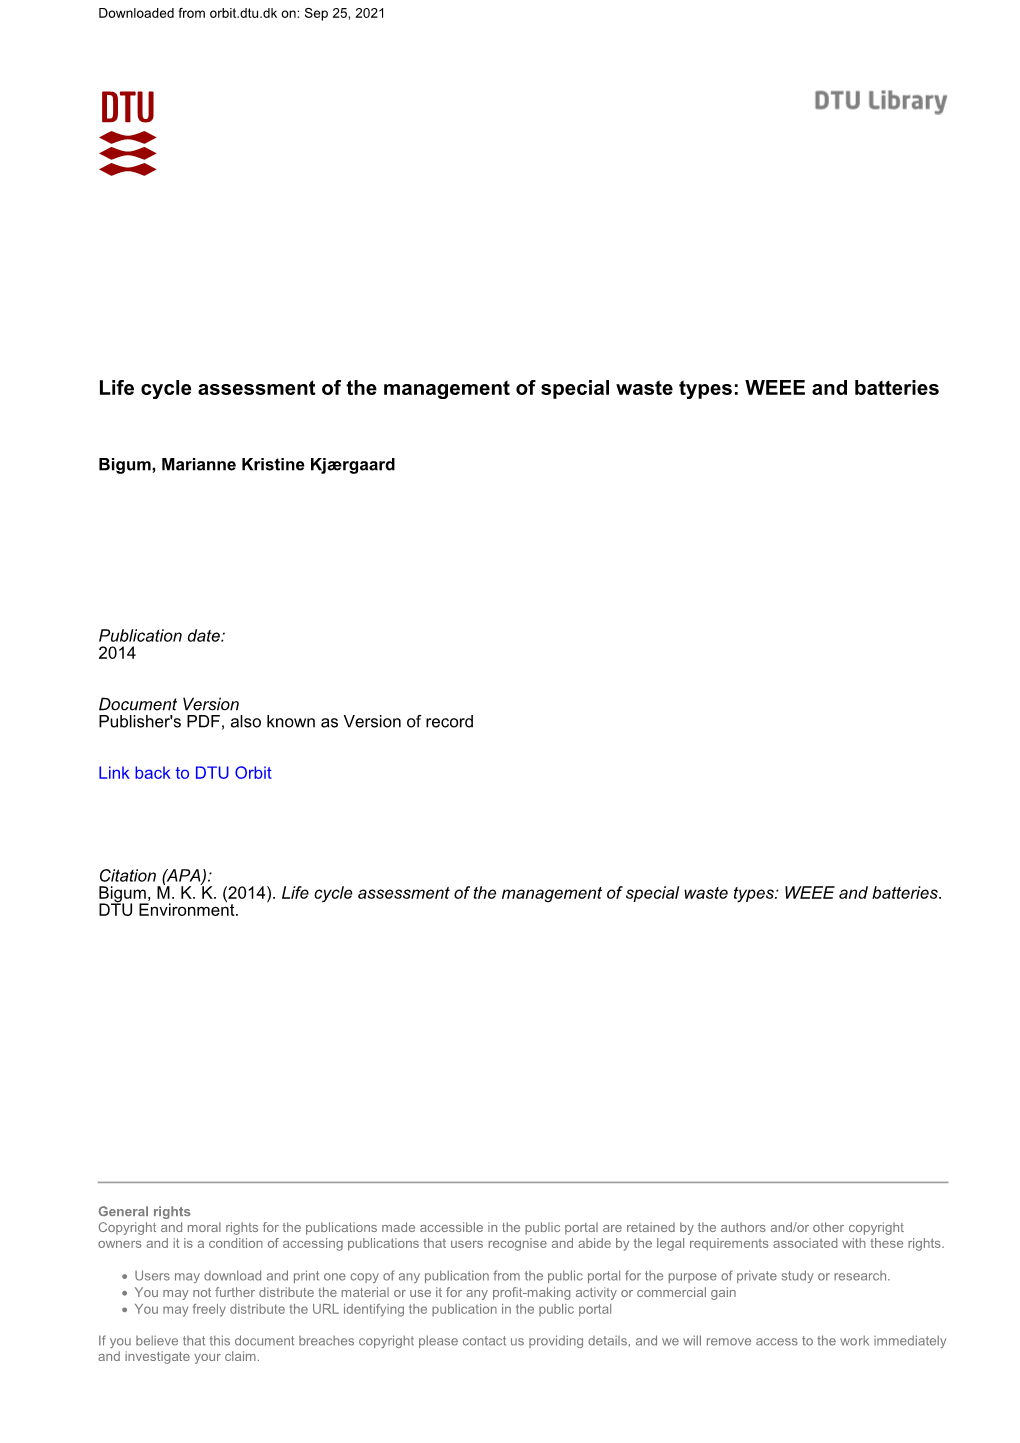 Life Cycle Assessment of the Management of Special Waste Types: WEEE and Batteries